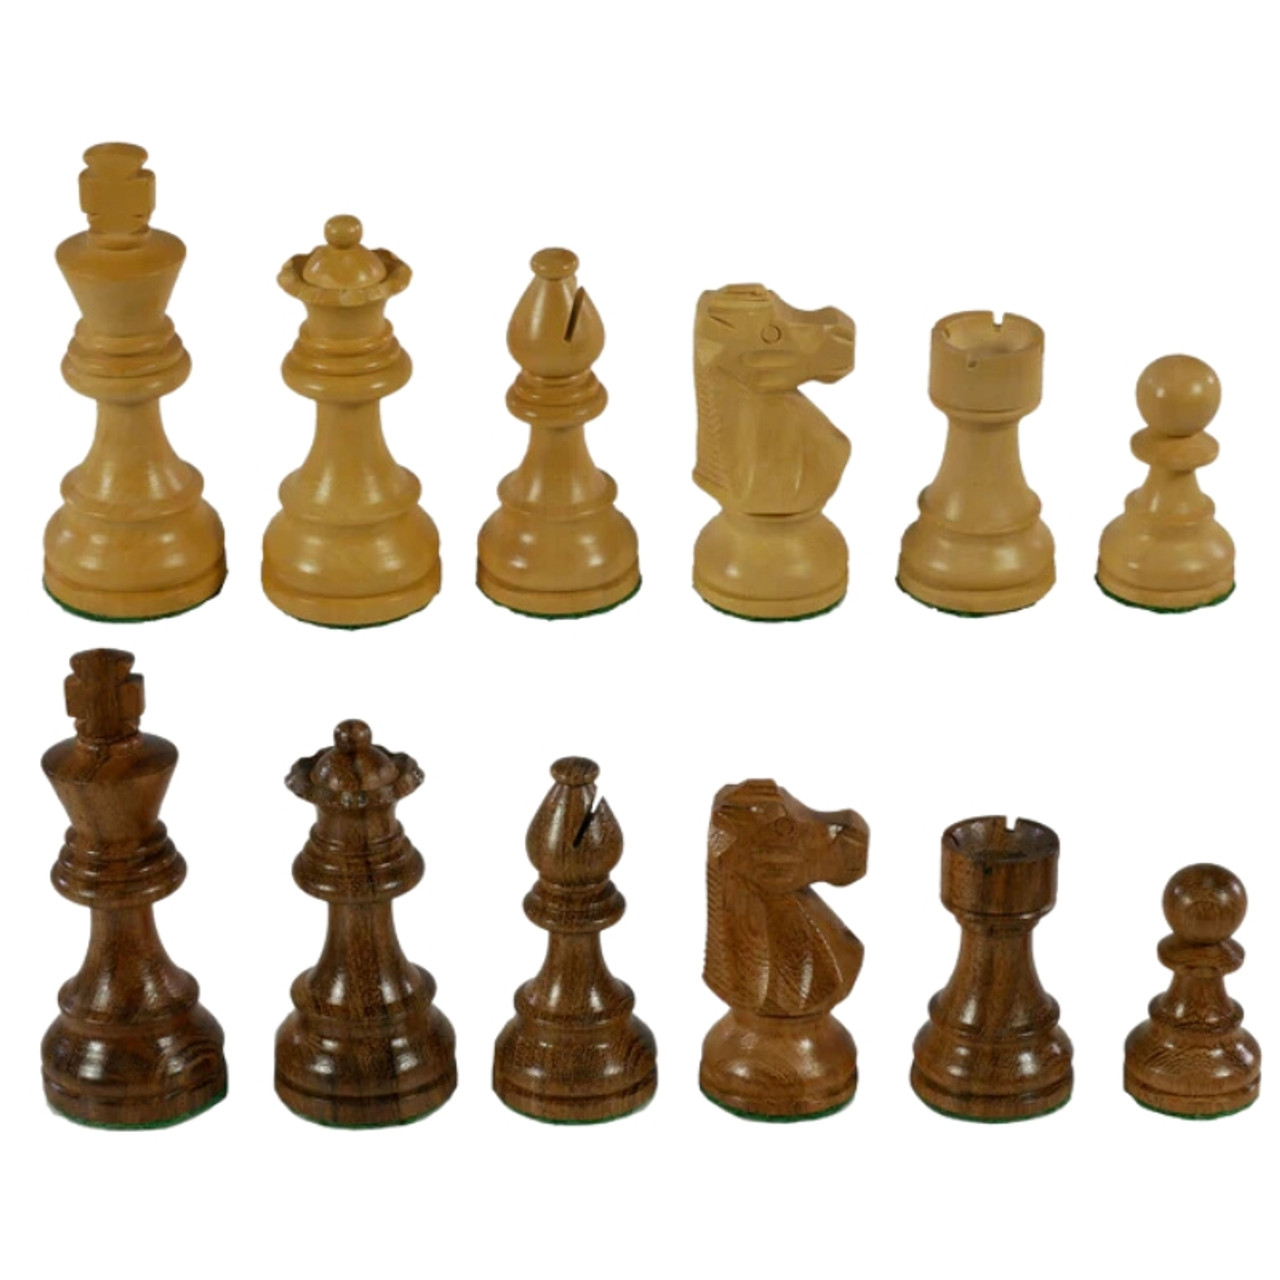 The Adeline Chess Pieces - Kirkwood with 3.5" King